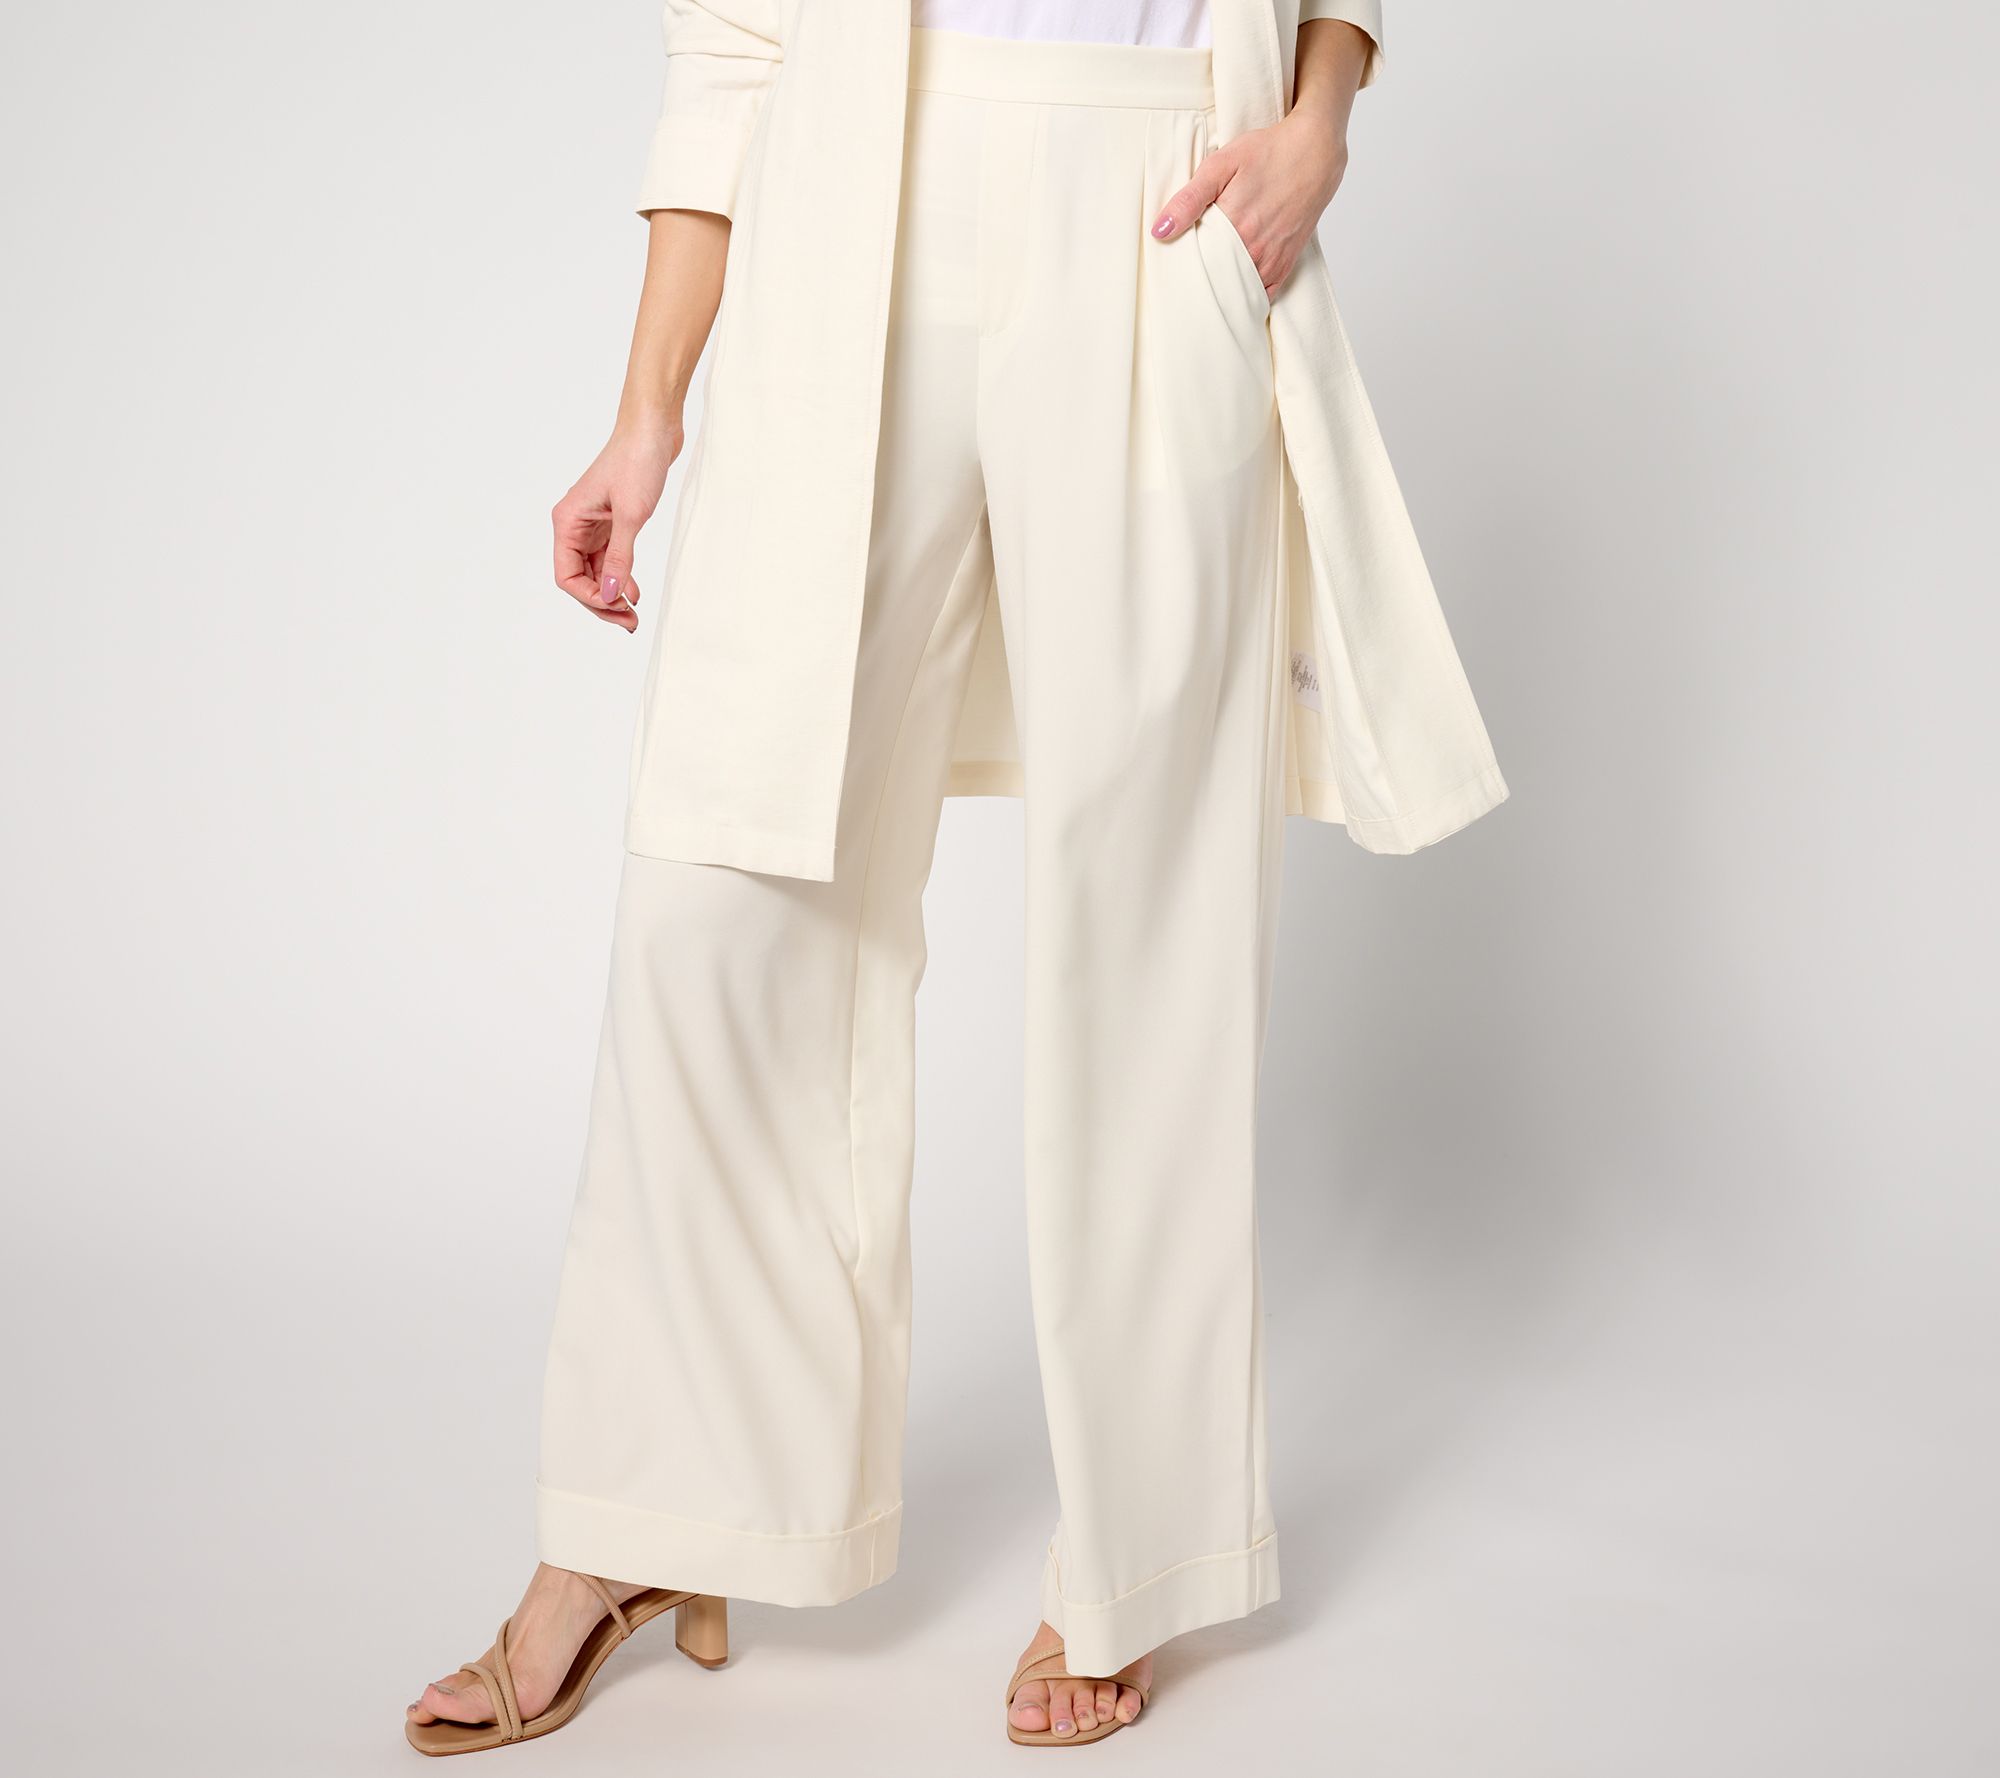 Women with Control Petite Cotton Jersey Pants with Zipper Detail 